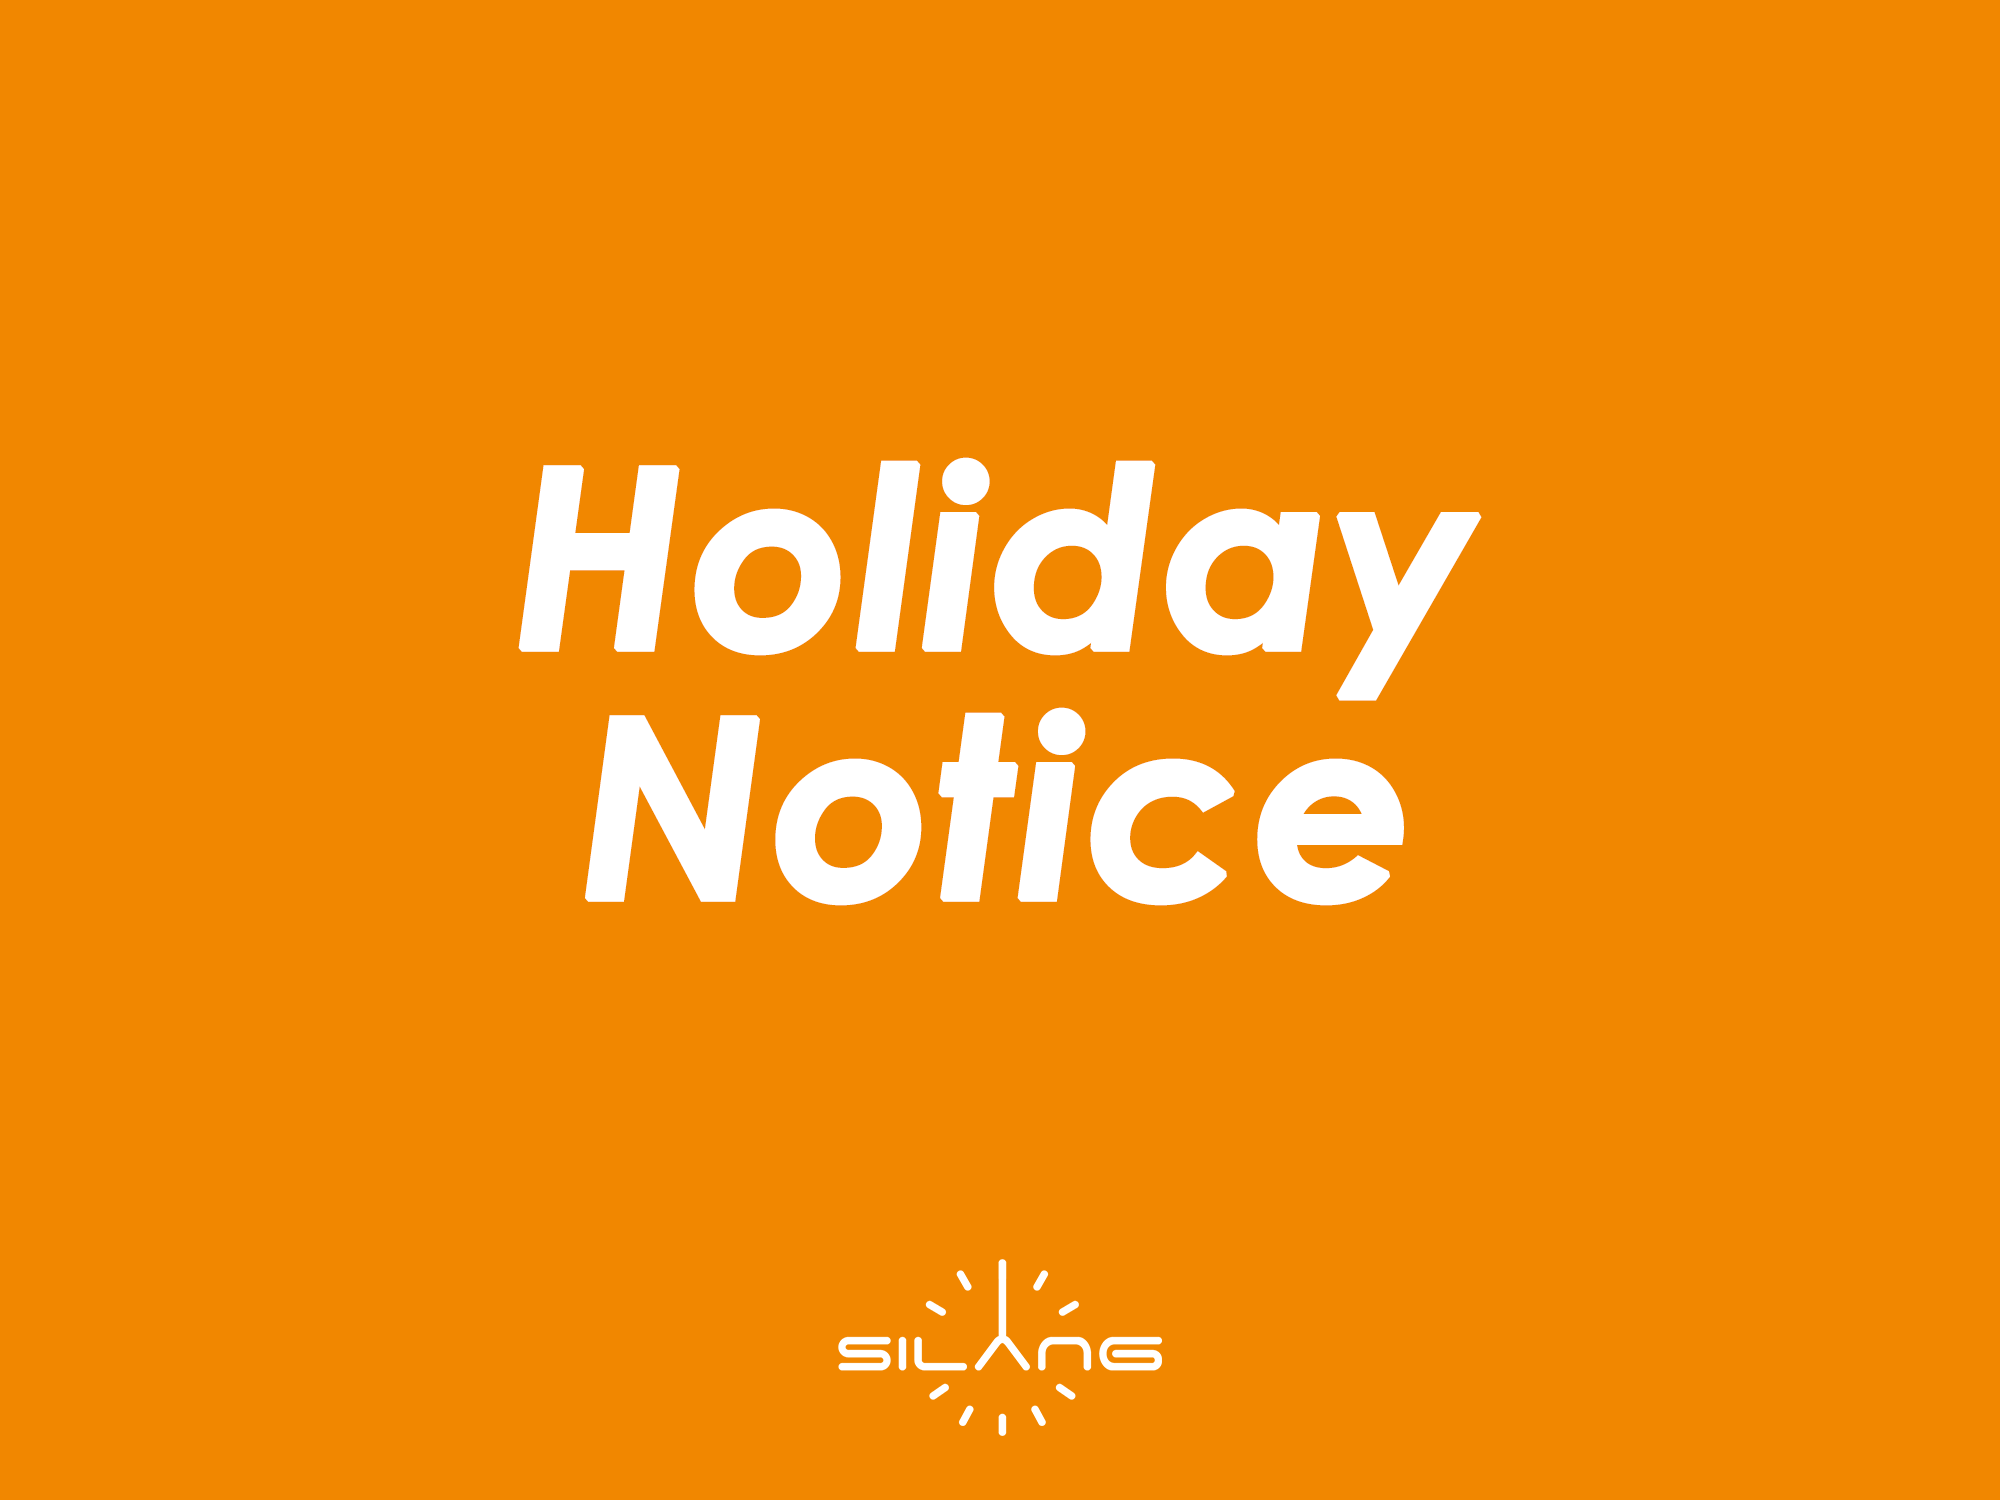 Holiday Notice for the Coming Worker's Day